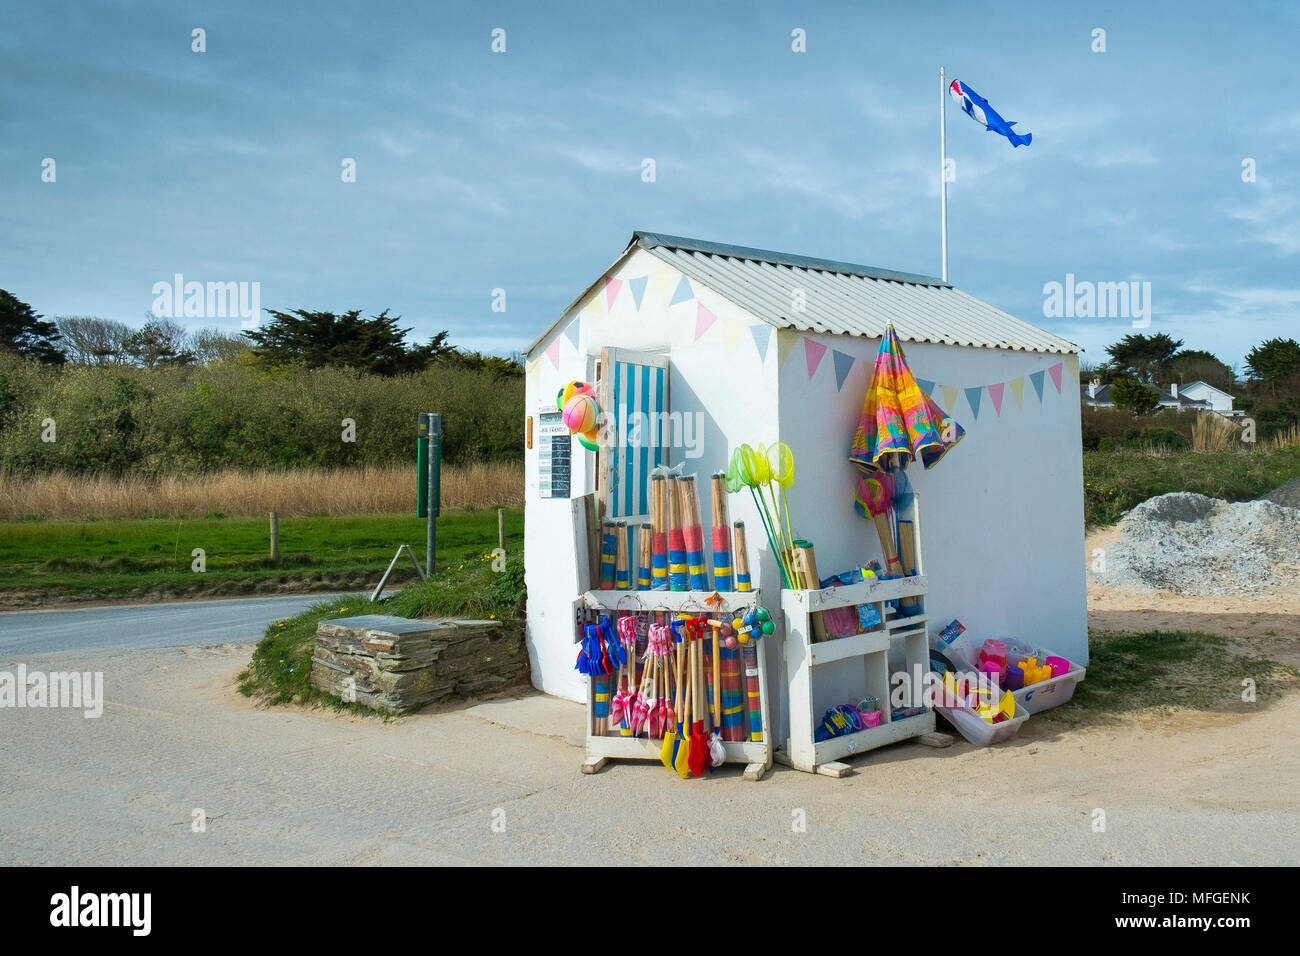 A small shack selling plastic windbreaks and buckets and spades in Cornwall. Stock Photo